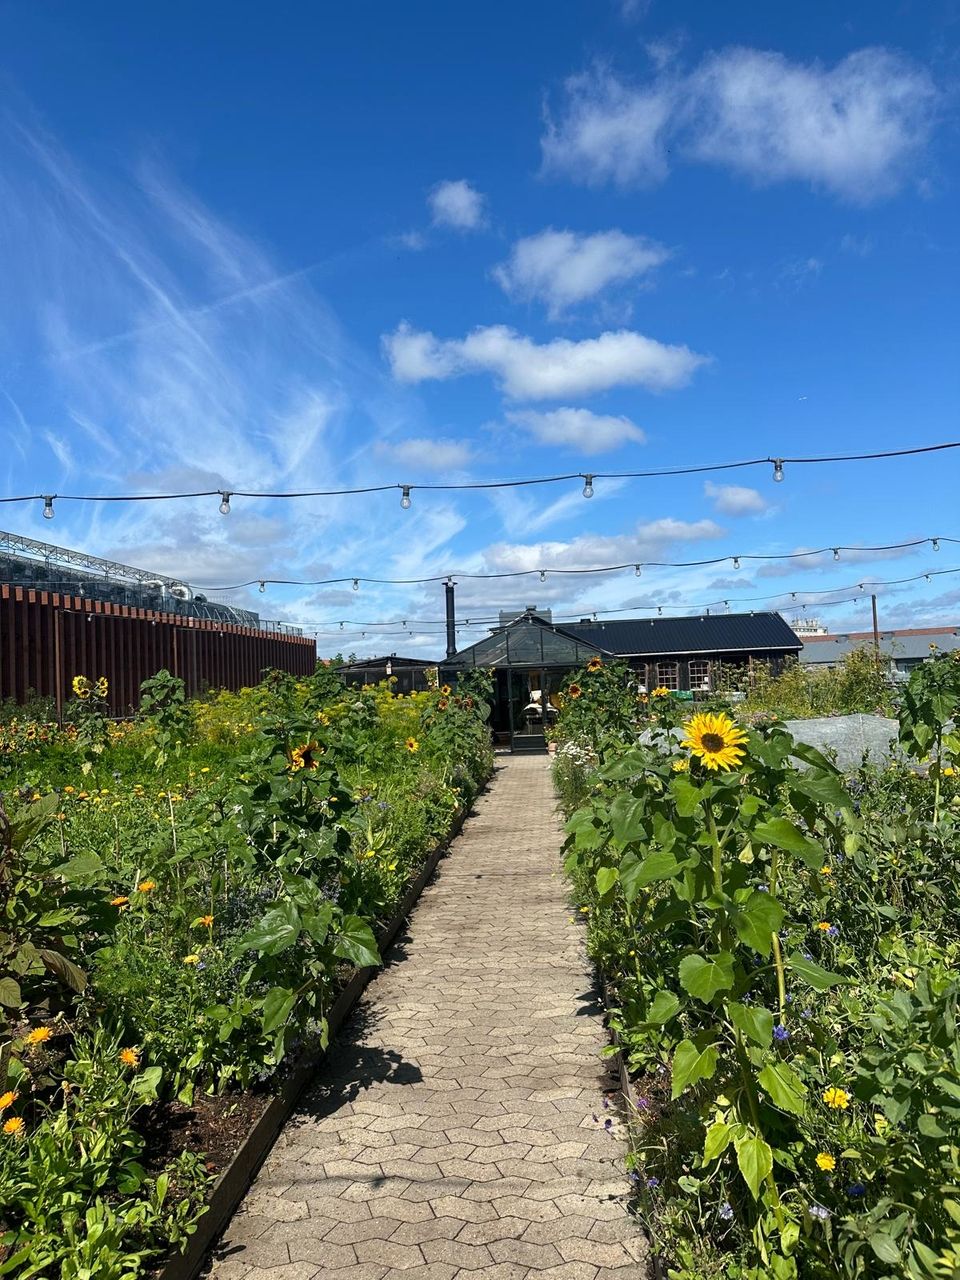 Photo of OsterGRO rooftop farm taken by a student.